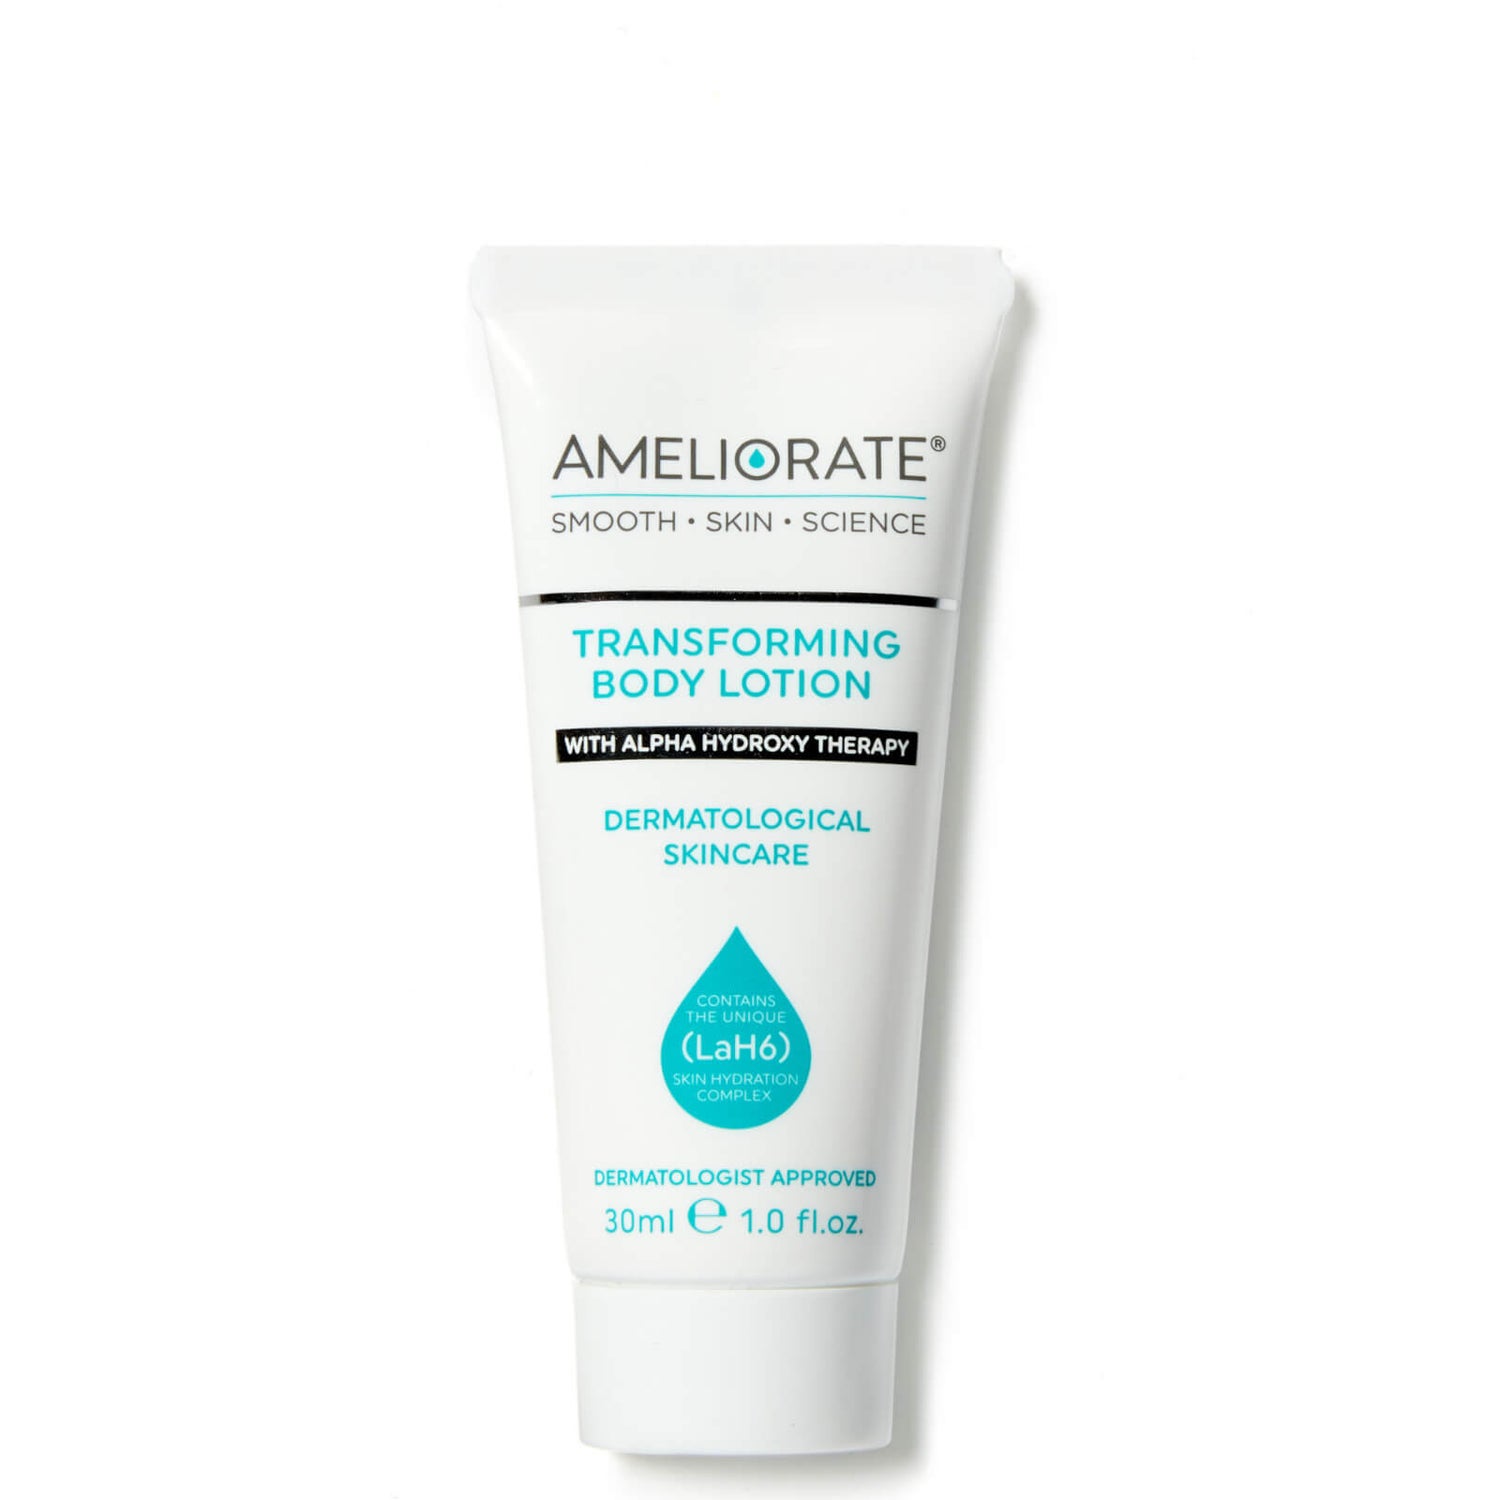 AMELIORATE Transforming Body Lotion 30ml